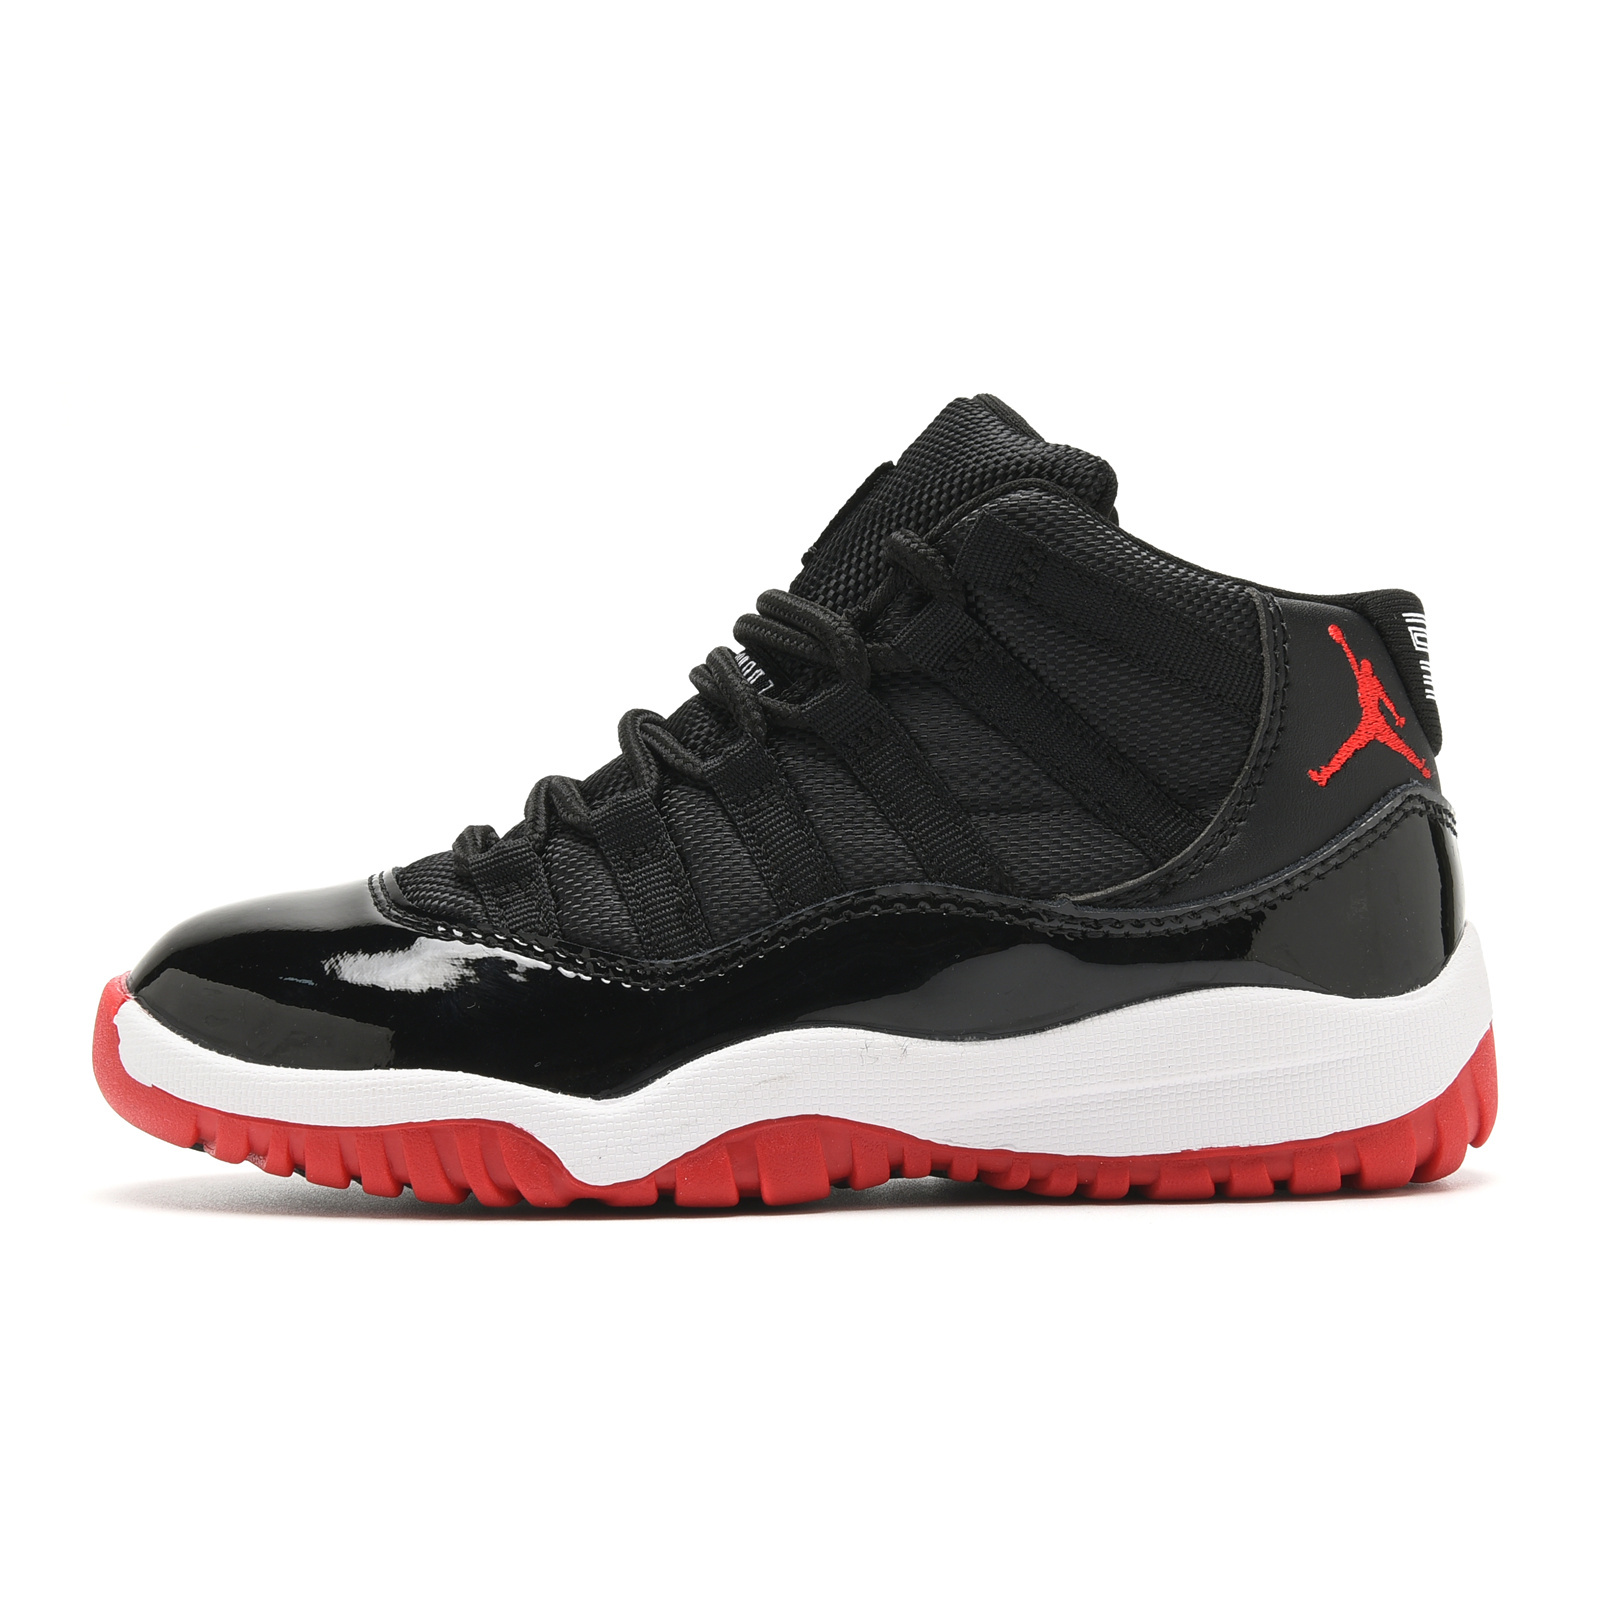 Youth Running Weapon Air Jordan 11 Black/Red Shoes 031